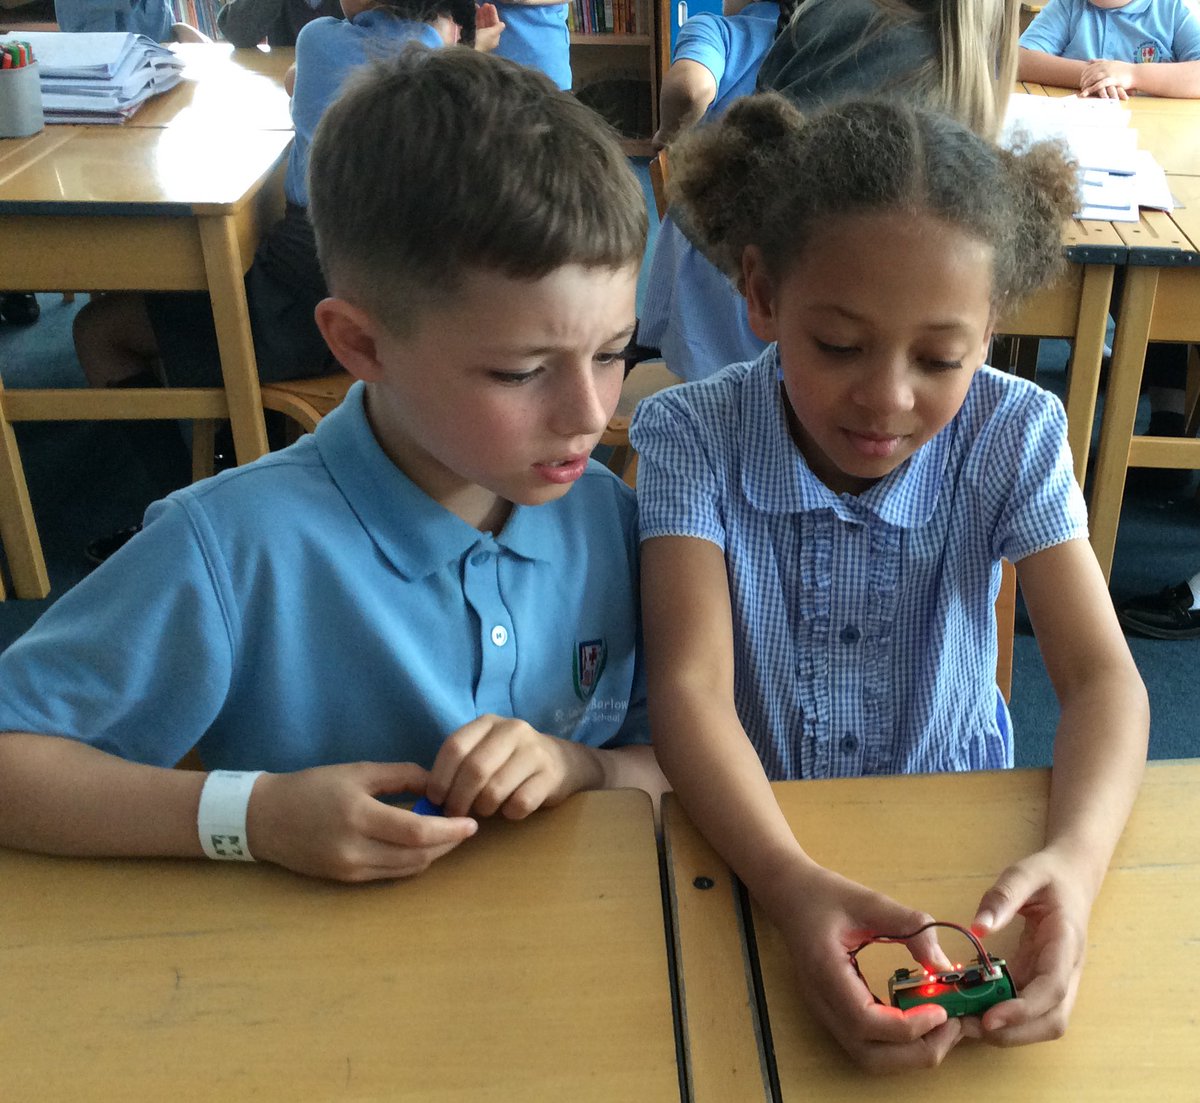 Year Four were able to explore the micro:bit computers today and start coding using the different inputs and outputs. They loved seeing their code come to life on the micro:bit.